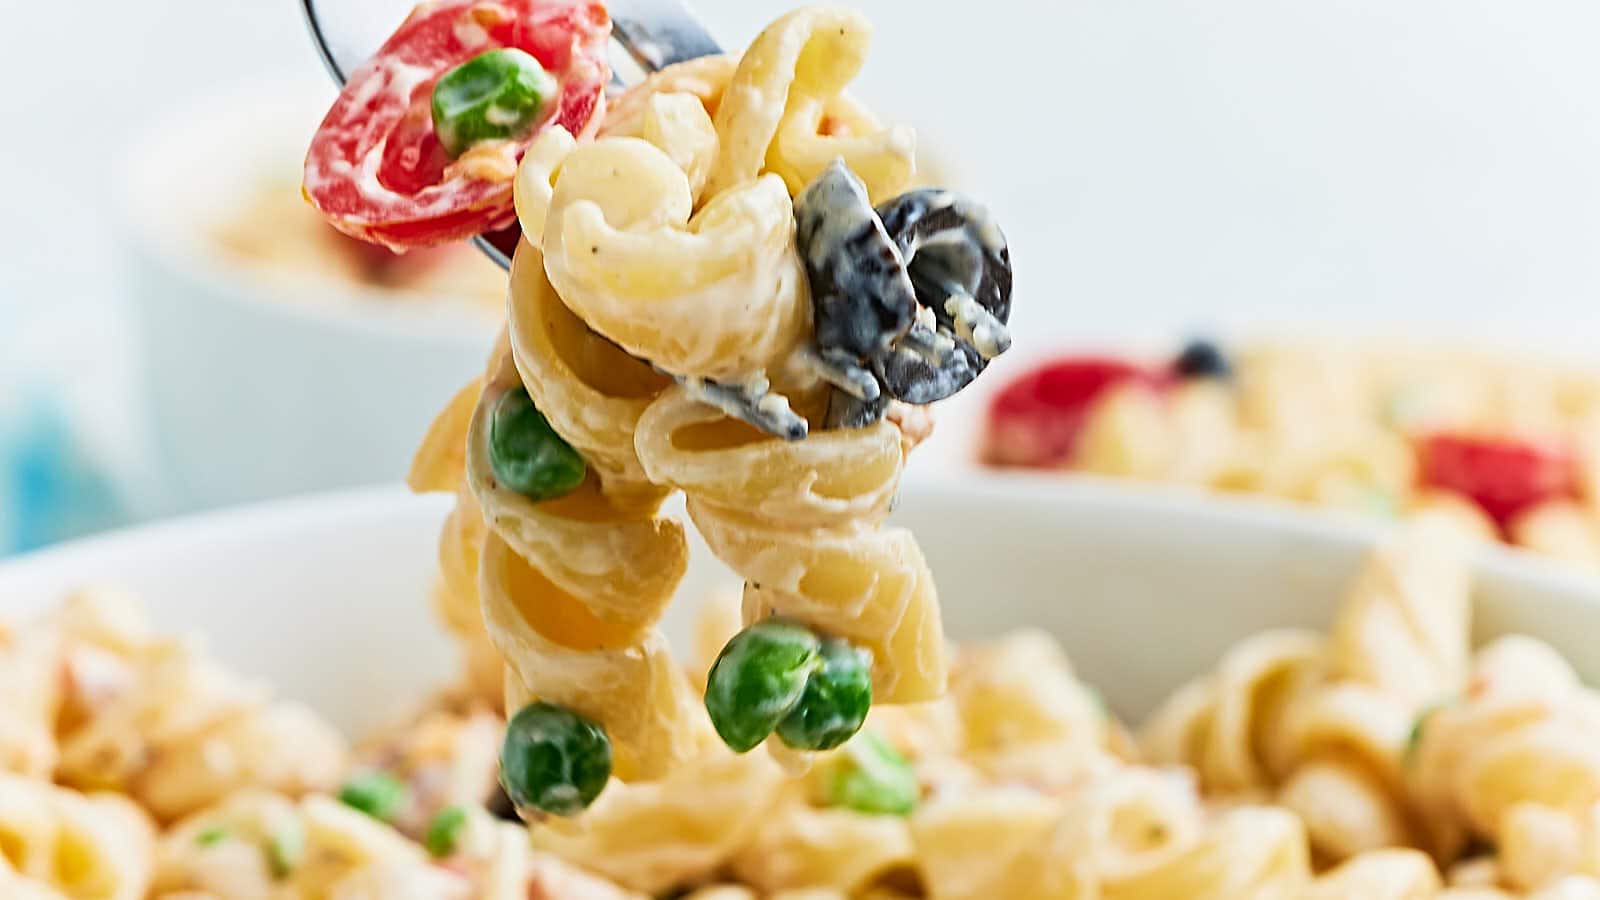 Bacon Ranch Pasta Salad recipe by Cheerful Cook.